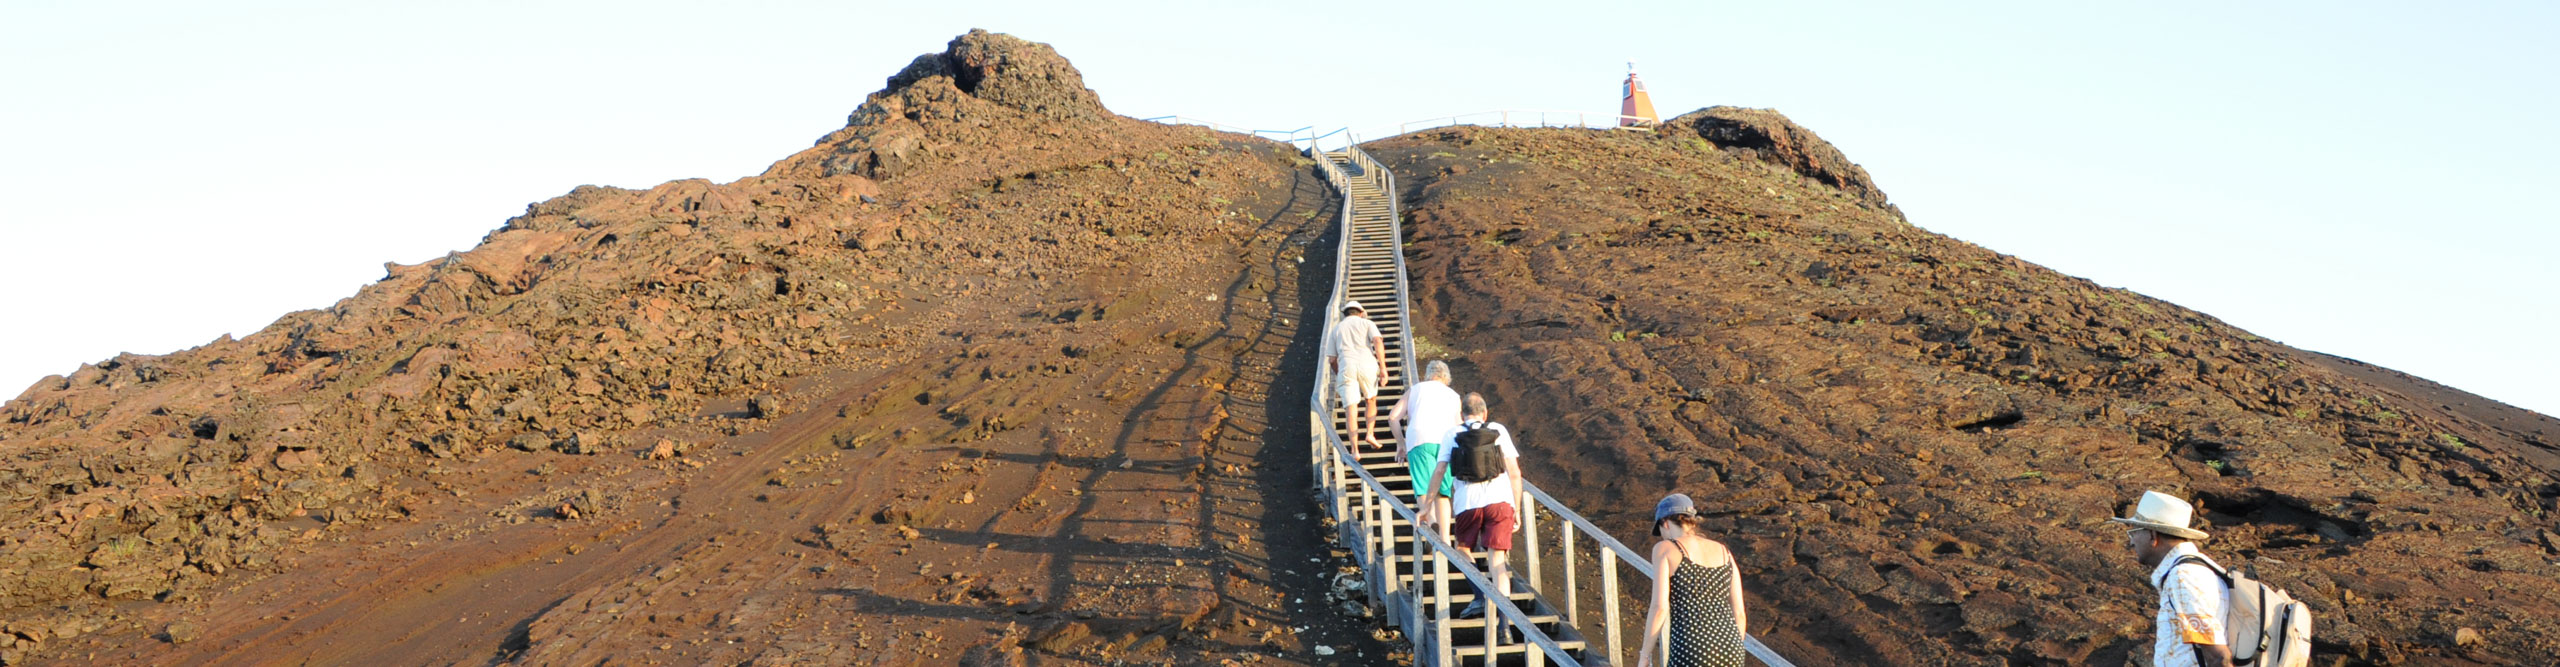 Group walking ups the stair on a hill in sunny weather on the Galapagos Islands 